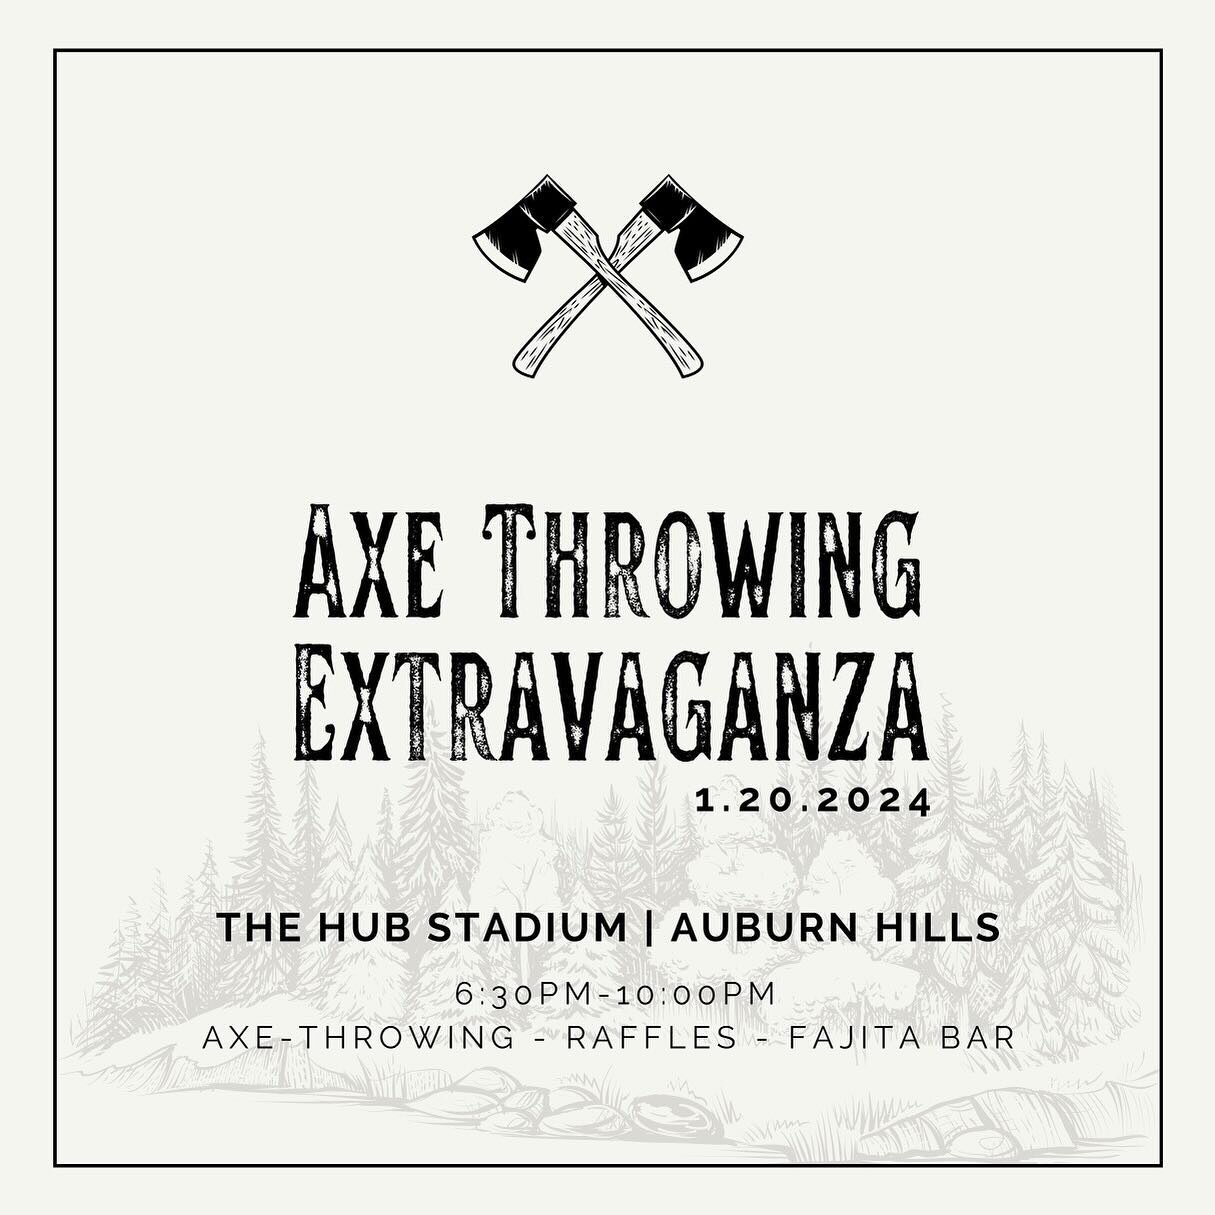 REMINDER &mdash; Axe Throwing Extravaganza this weekend!!!!

you can still buy tickets at the door &mdash; please RSVP in advance.

Hope to see you out for a good time benefiting a great cause!